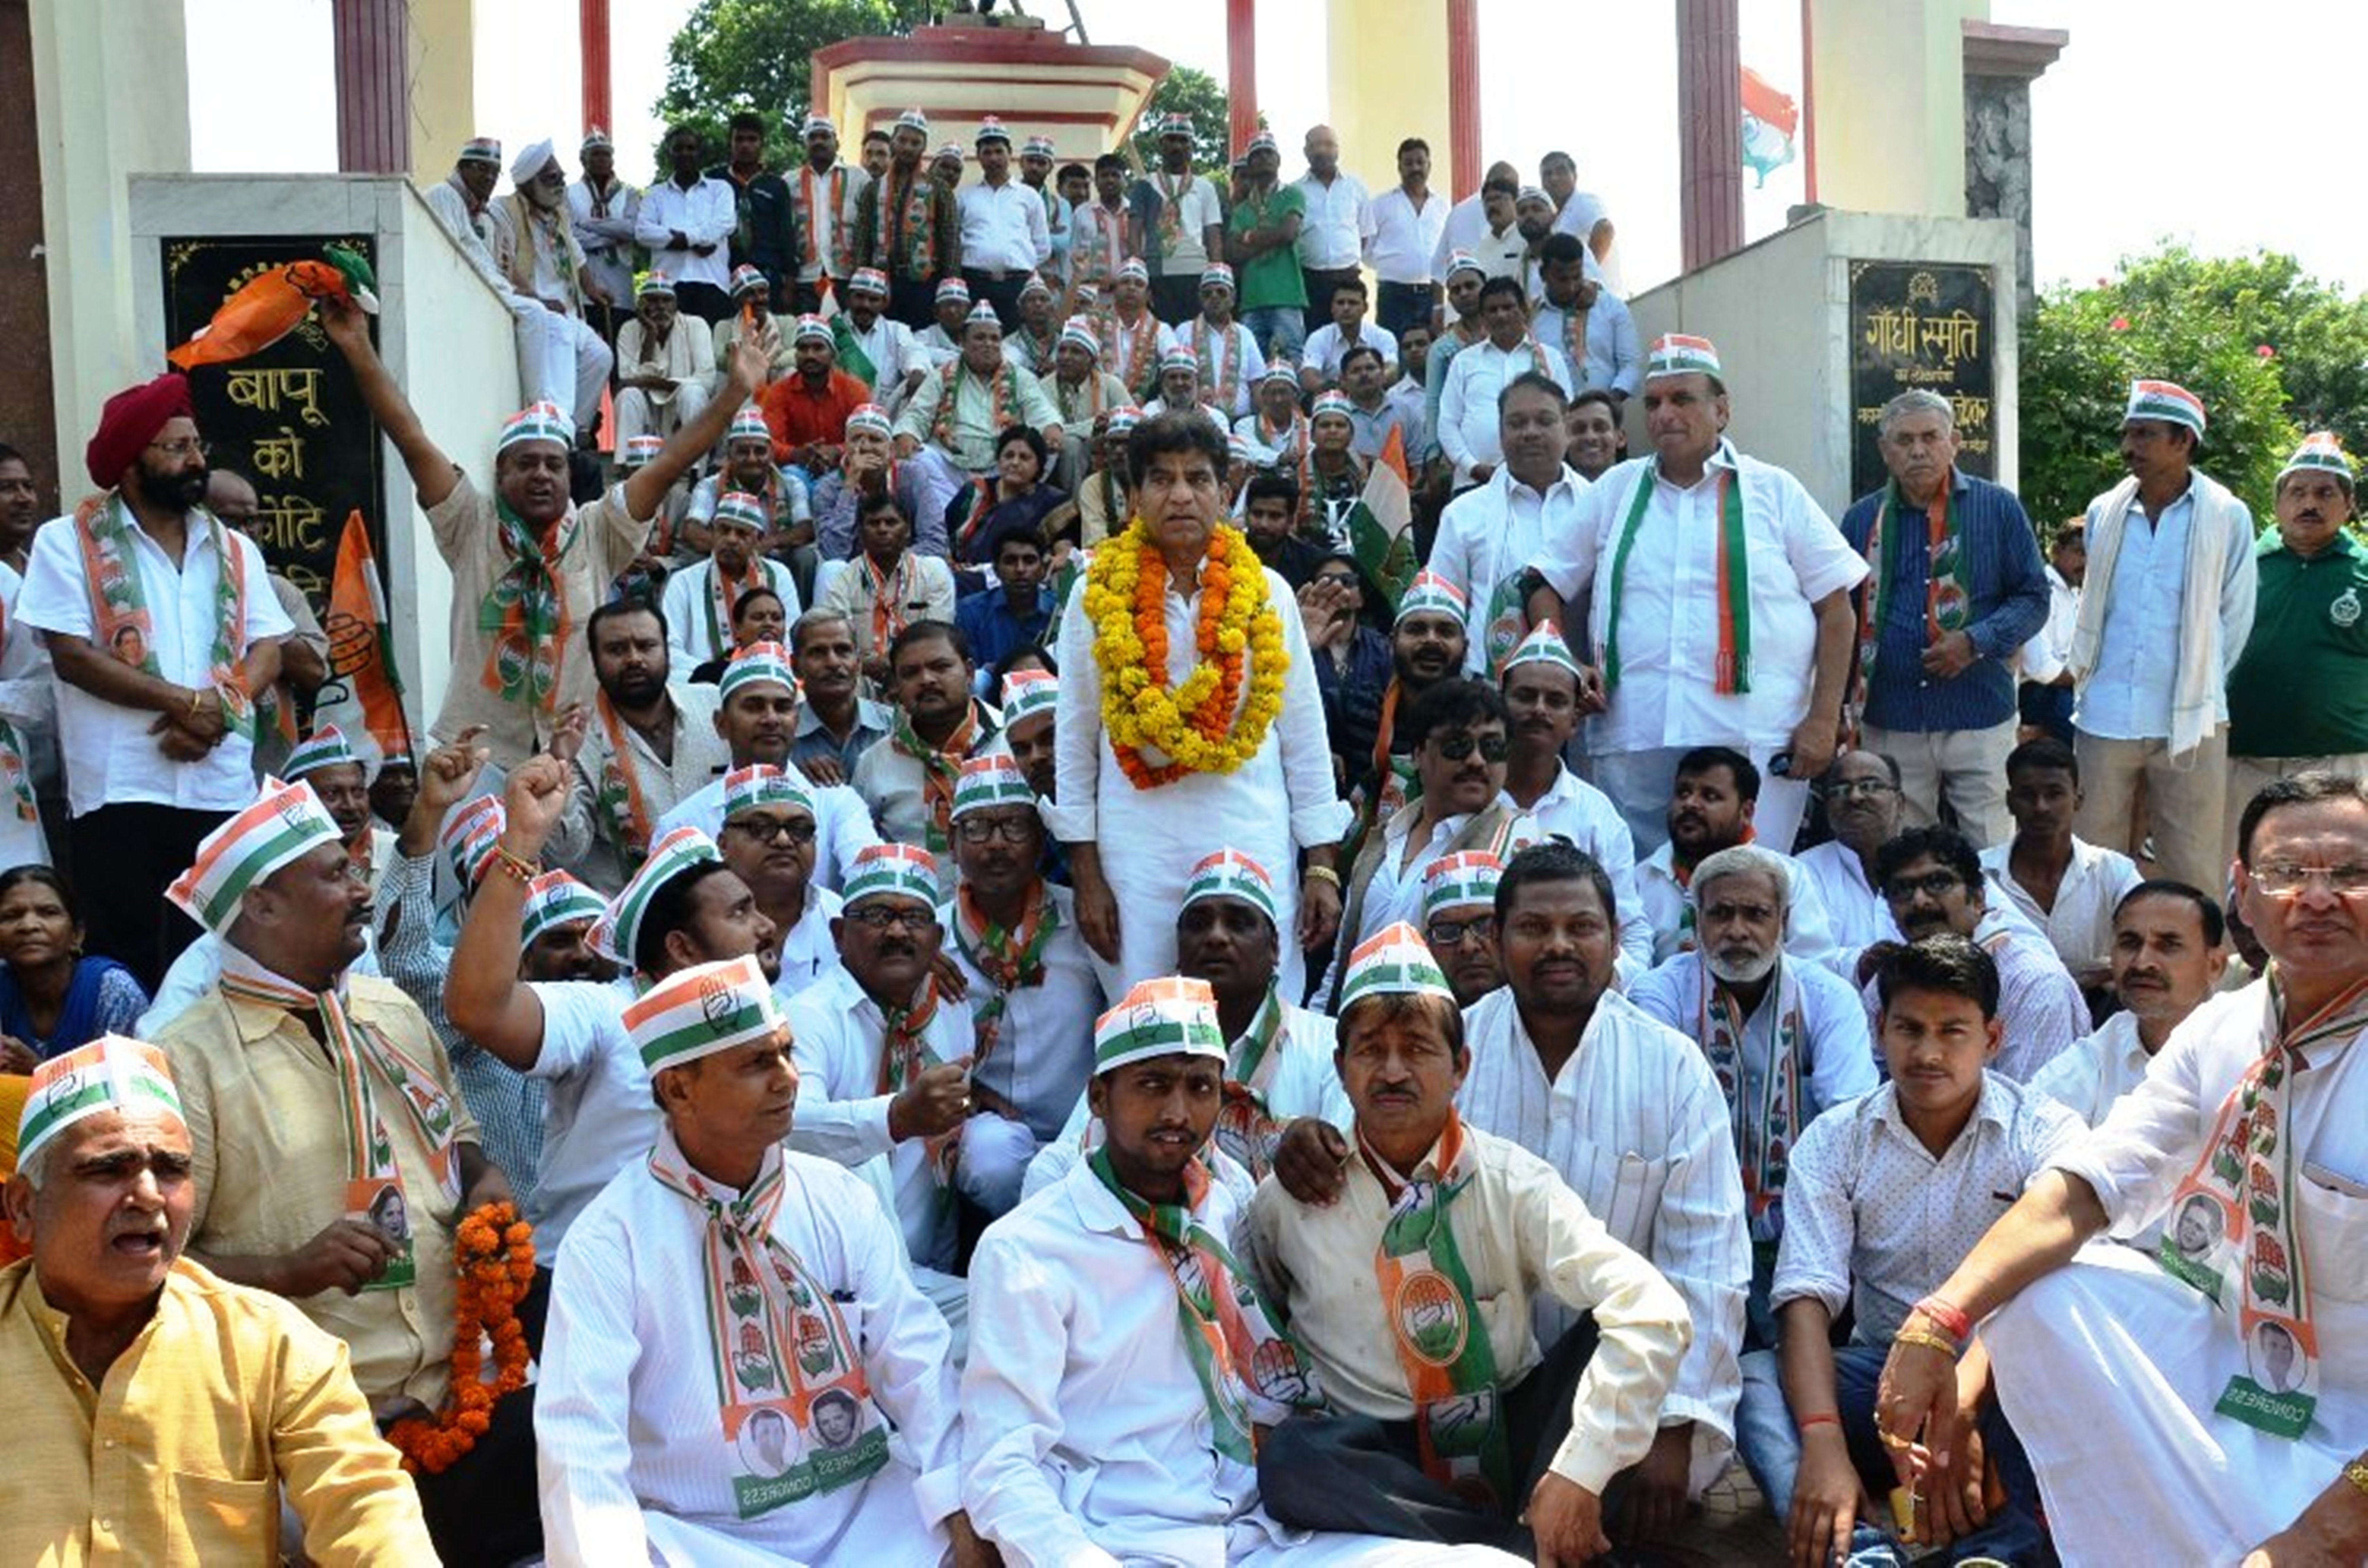 congress worker protest against atrocities on north indians in gujarat